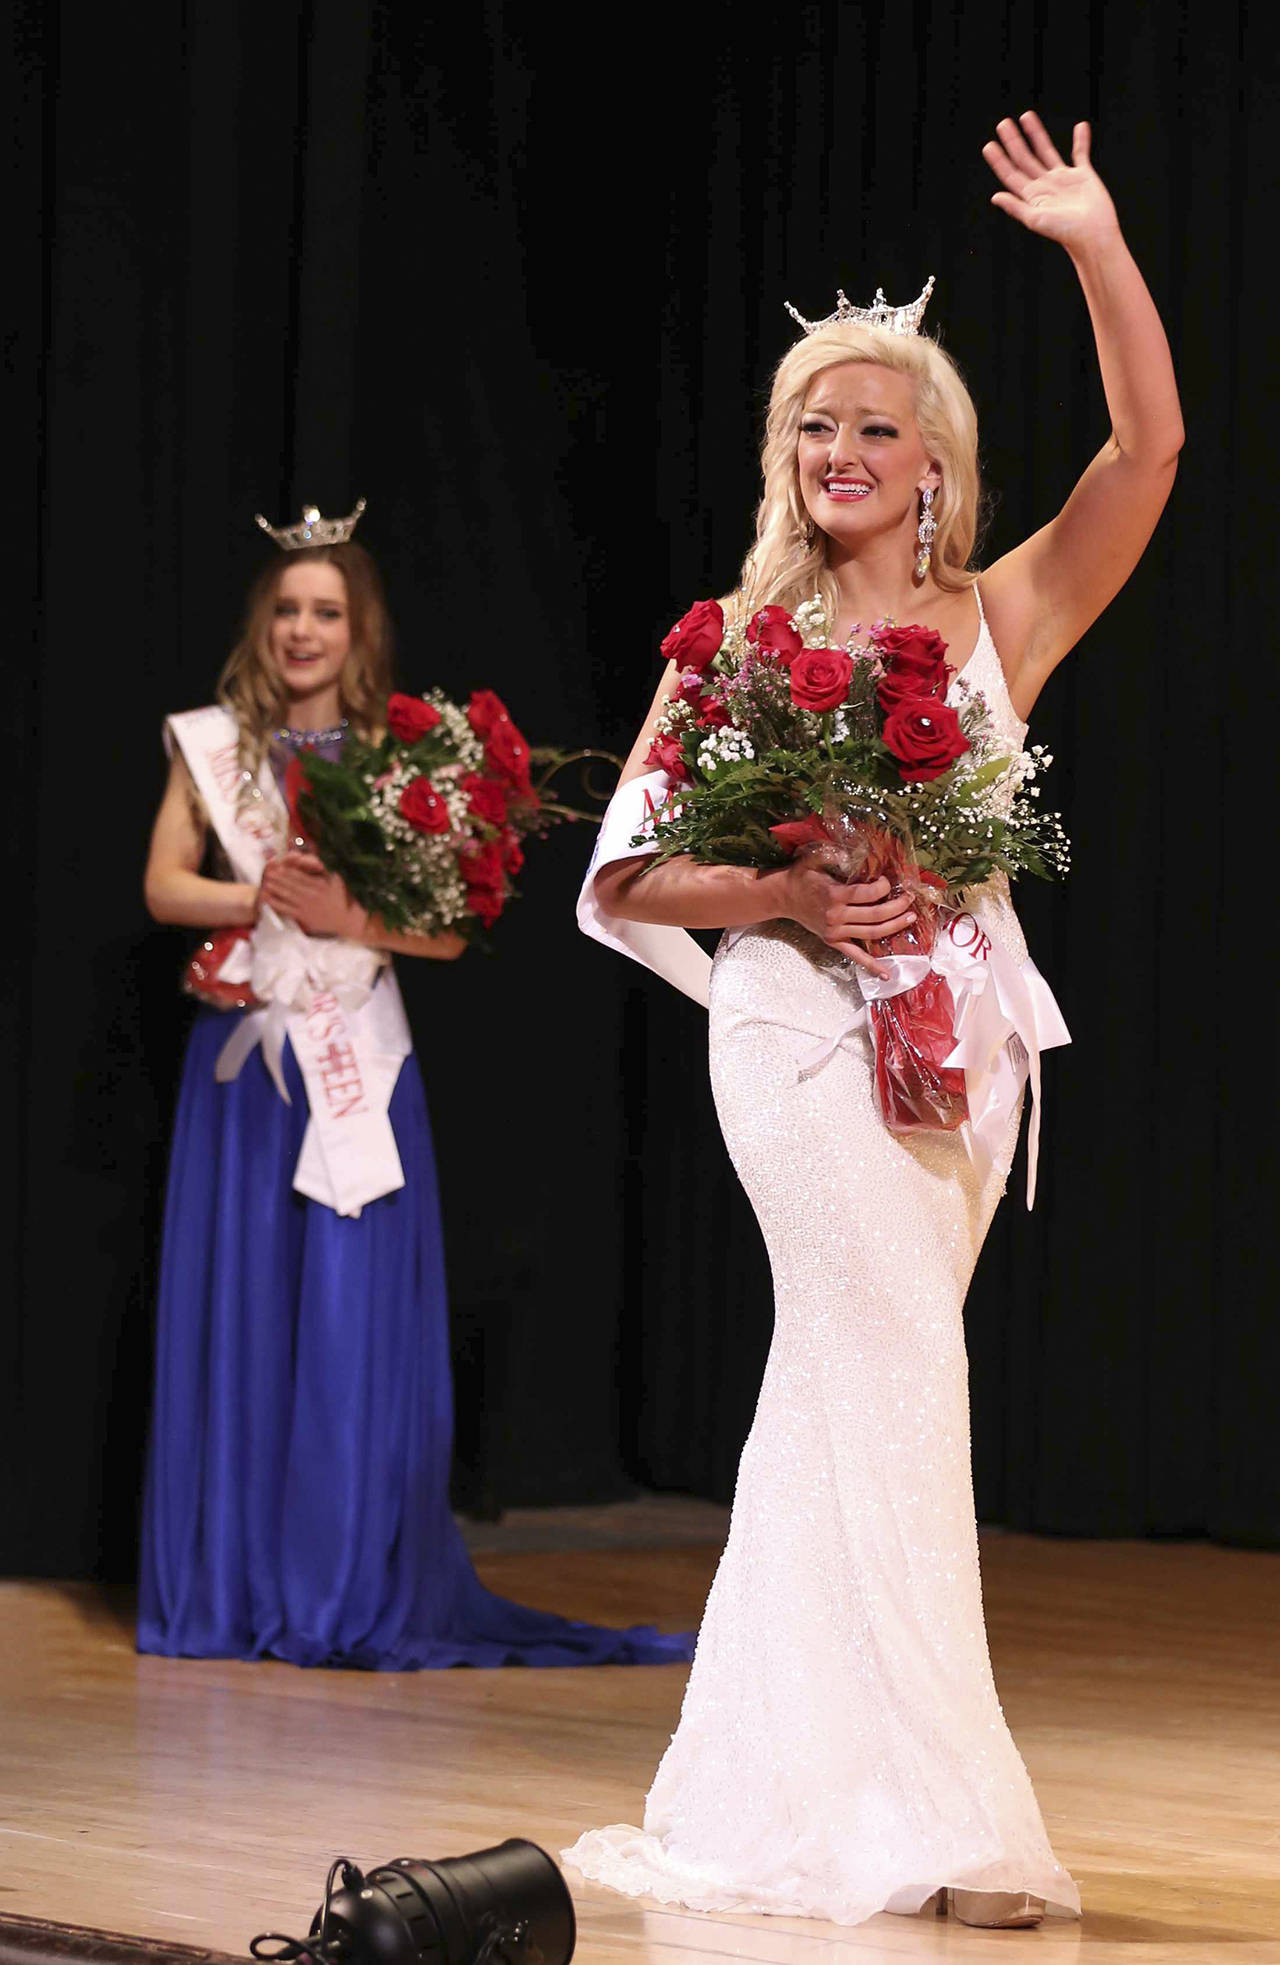 Photo by Keith J. Krueger                                Kuinn Karaffa, 22, waves after being crowned Miss Grays Harbor 2018 at the 7th Street Theatre in Hoquiam on Saturday. Behind her, at left, is Mercedes Morrill, 13, the newly crowned Grays Harbor Outstanding Teen 2018.